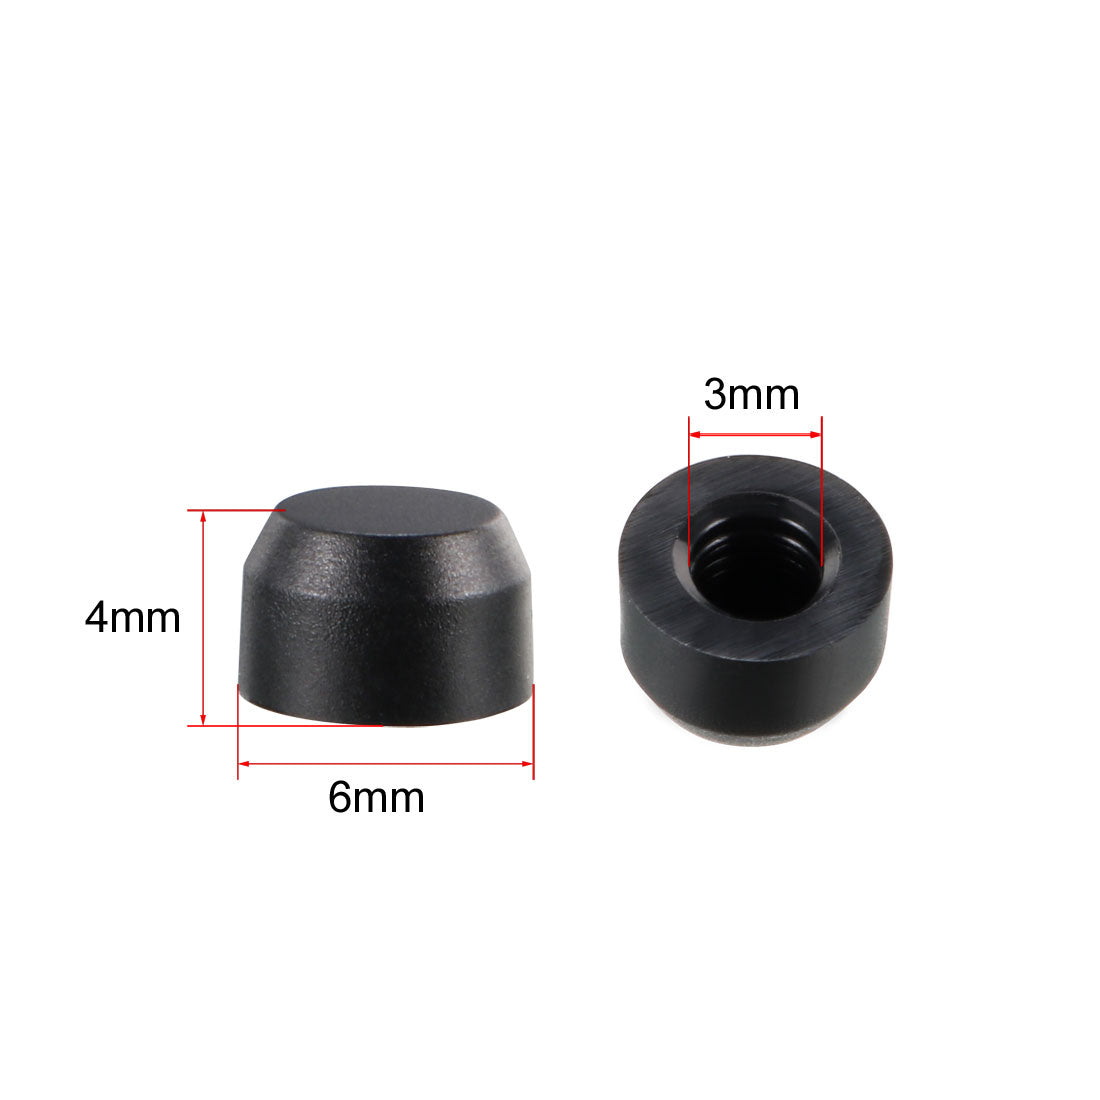 uxcell Uxcell 20pcs 3mm Hole Dia Silica-gel Pushbutton Tactile Switch Caps Cover Keycaps Protector Black for 6x6 Tact Switch